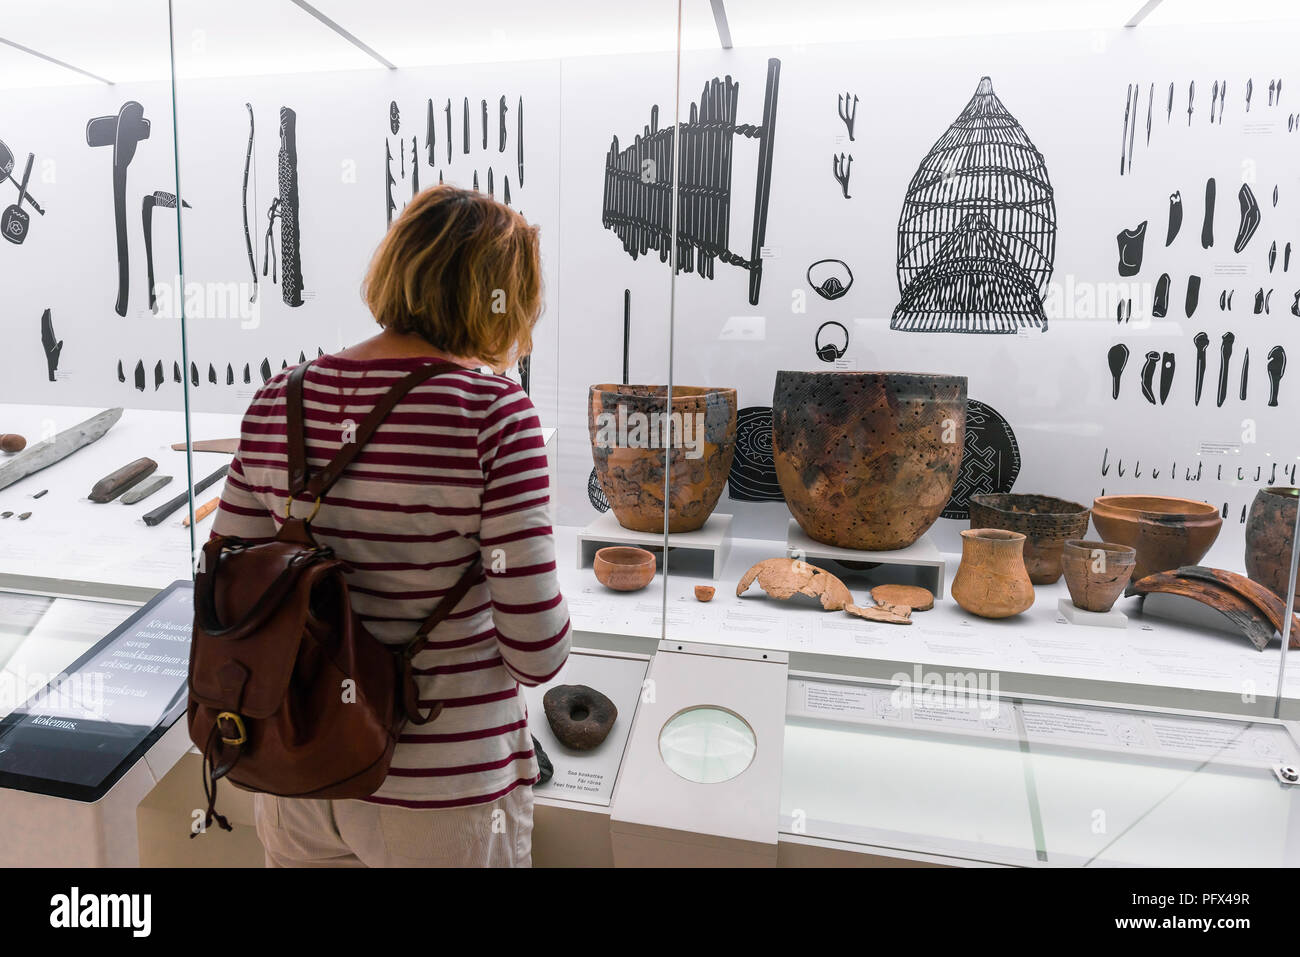 National Museum Of Finland, rear view of a middle aged woman viewing Iron Age pottery in a display case inside the Kansallismuseo in Helsinki. Stock Photo